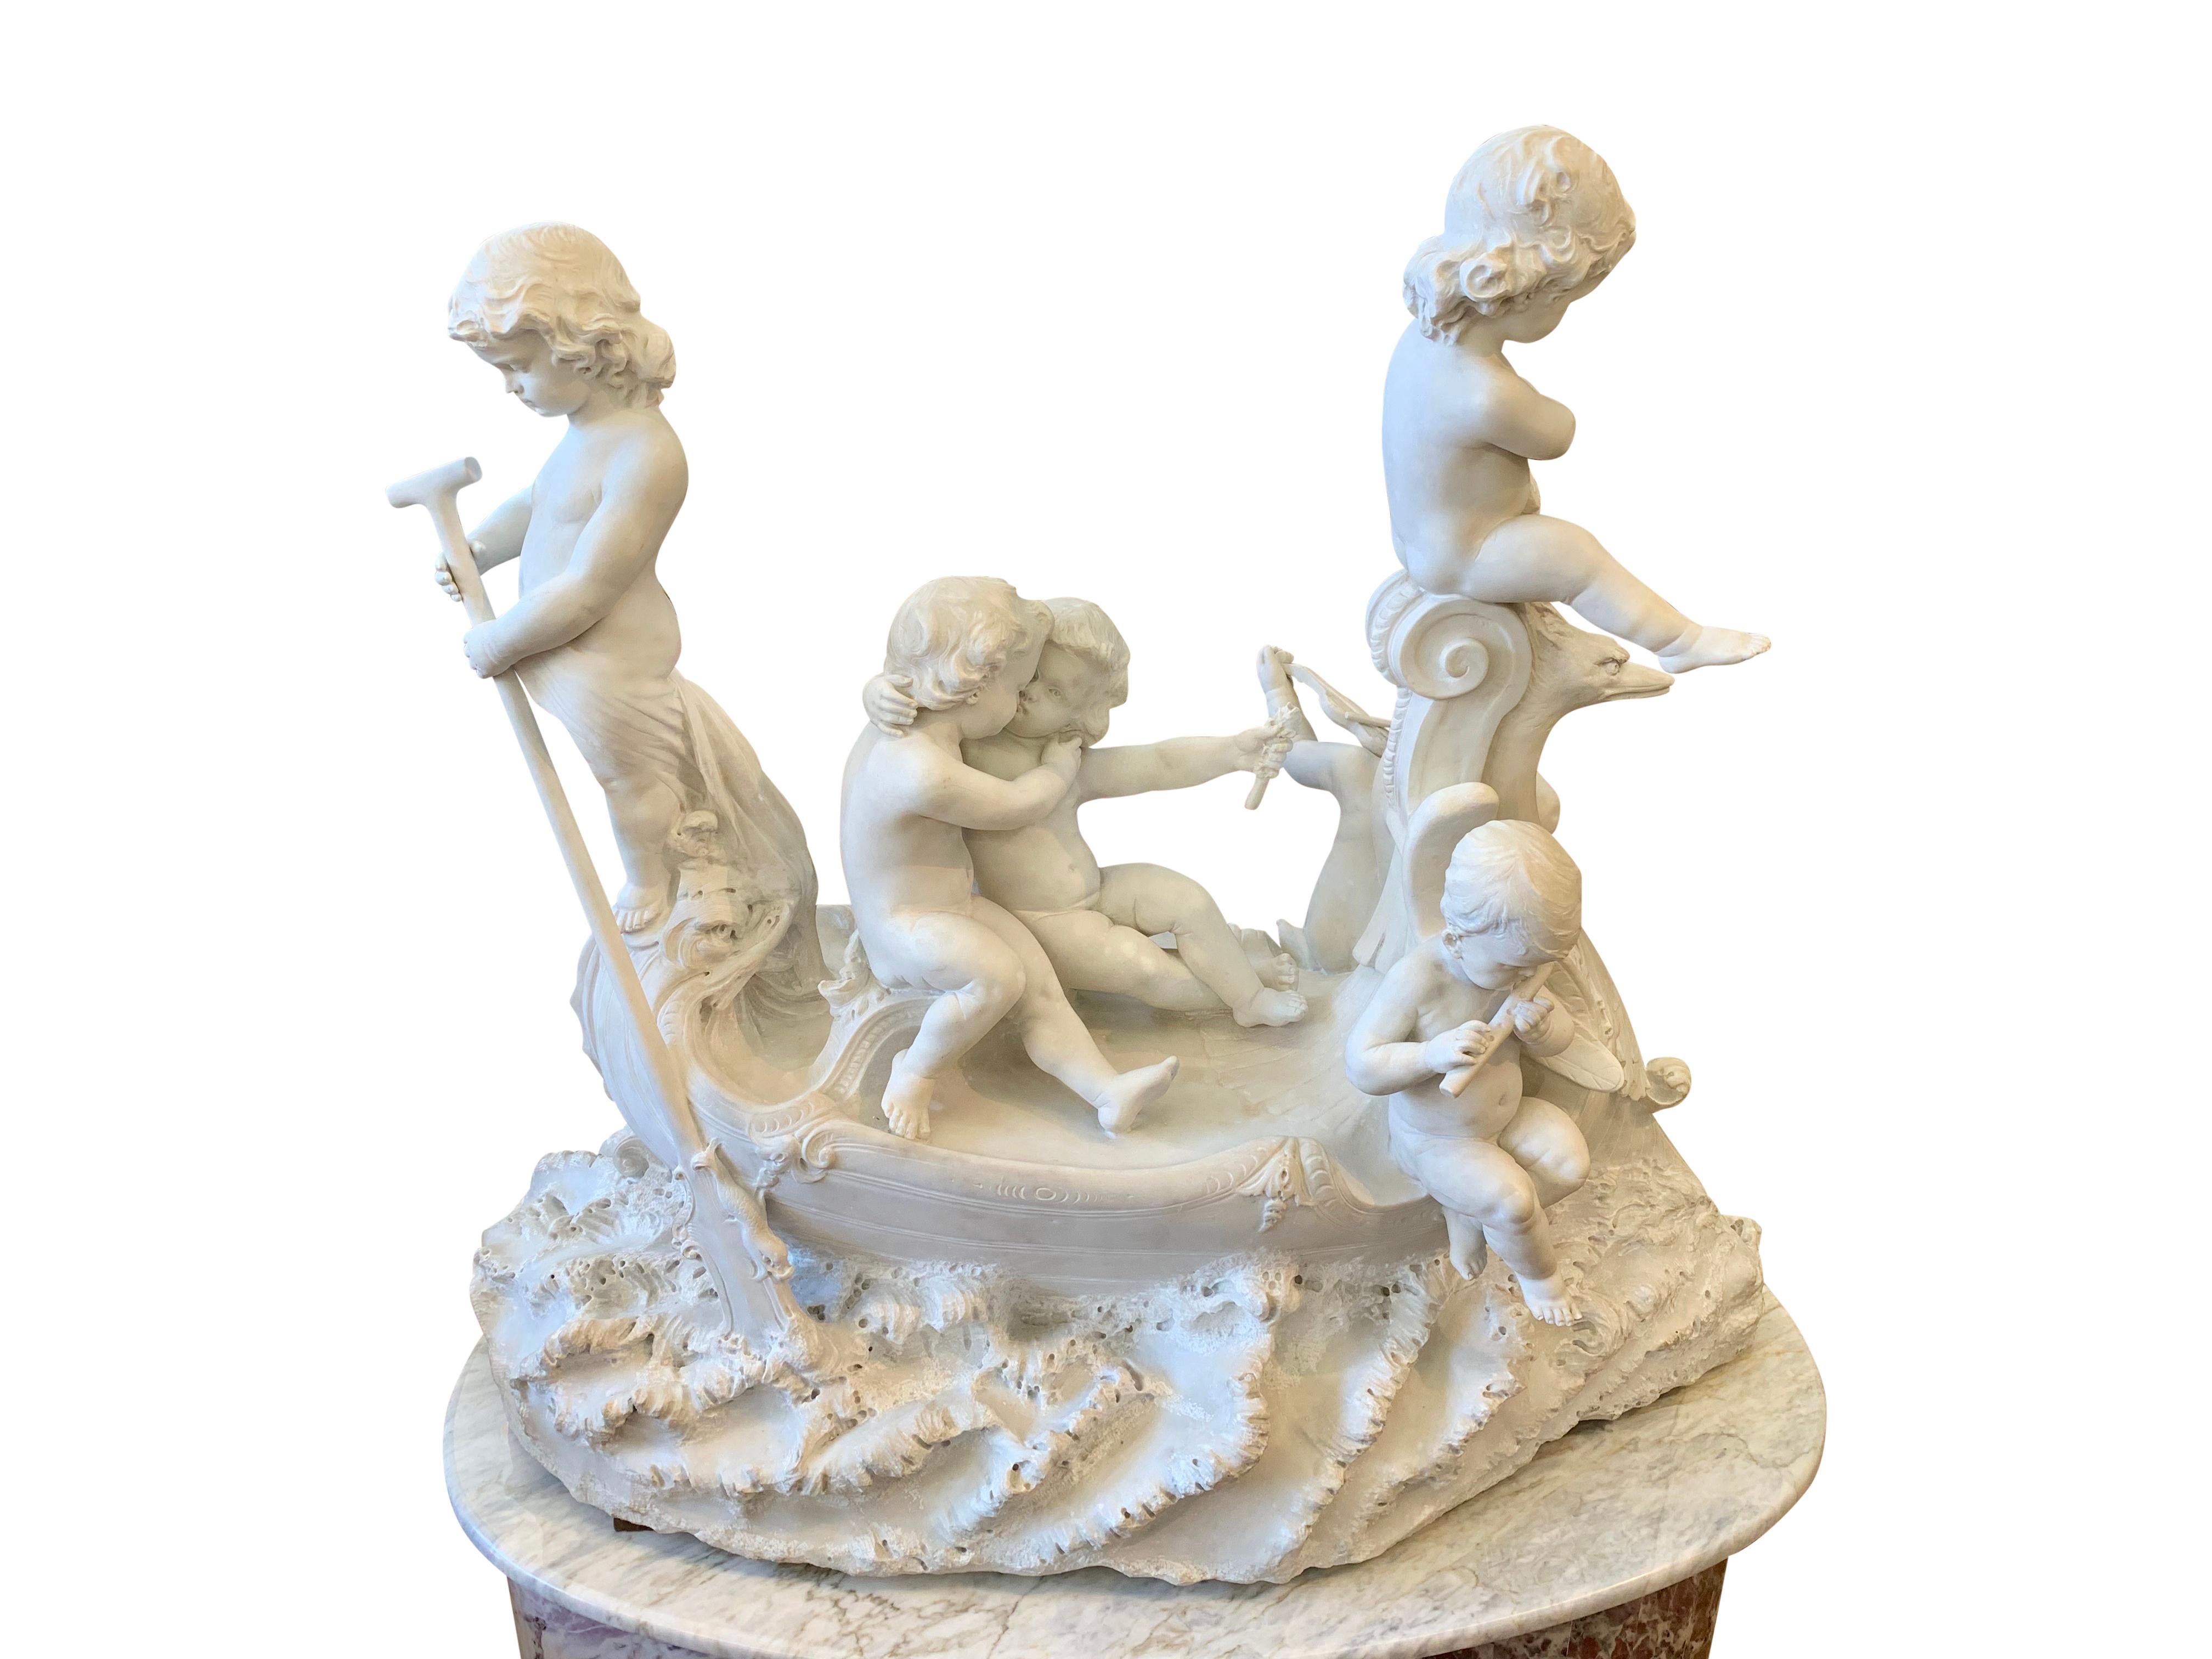 This charming 19th century Italian carved white Carrara marble group depicts six children in a boat. Three children playing musical instruments (violin, flute and angel harp), one cherub rows the swan shaped boat, and two other embracing while one